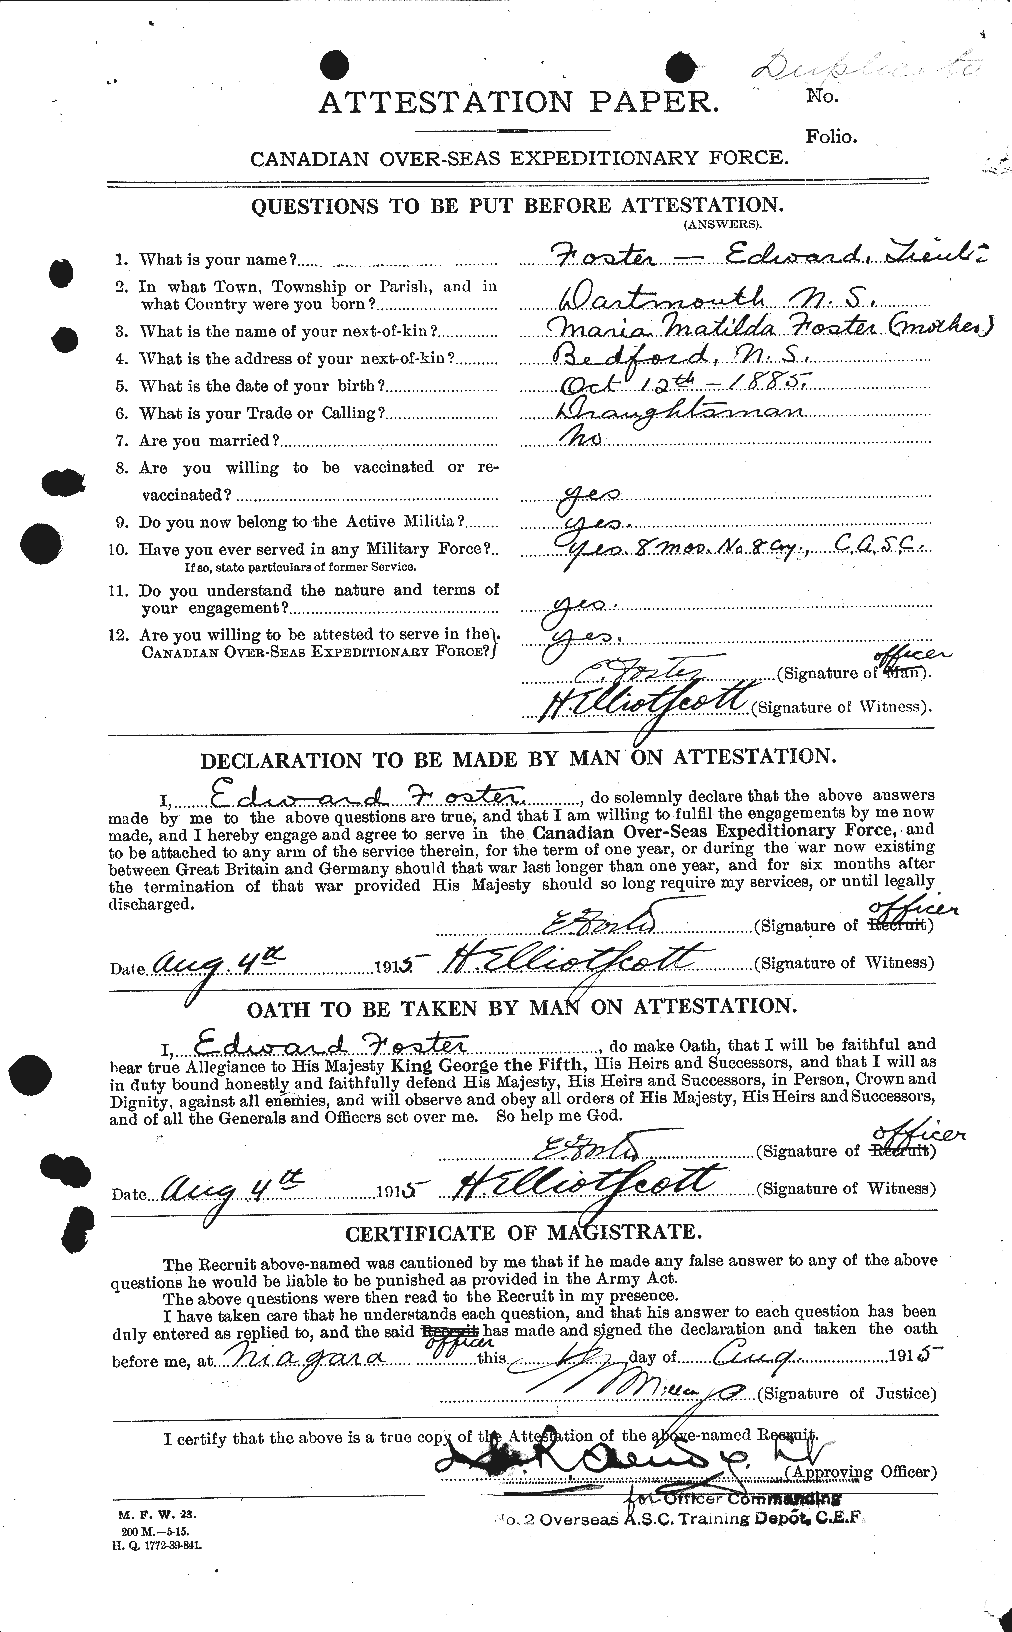 Personnel Records of the First World War - CEF 330575a